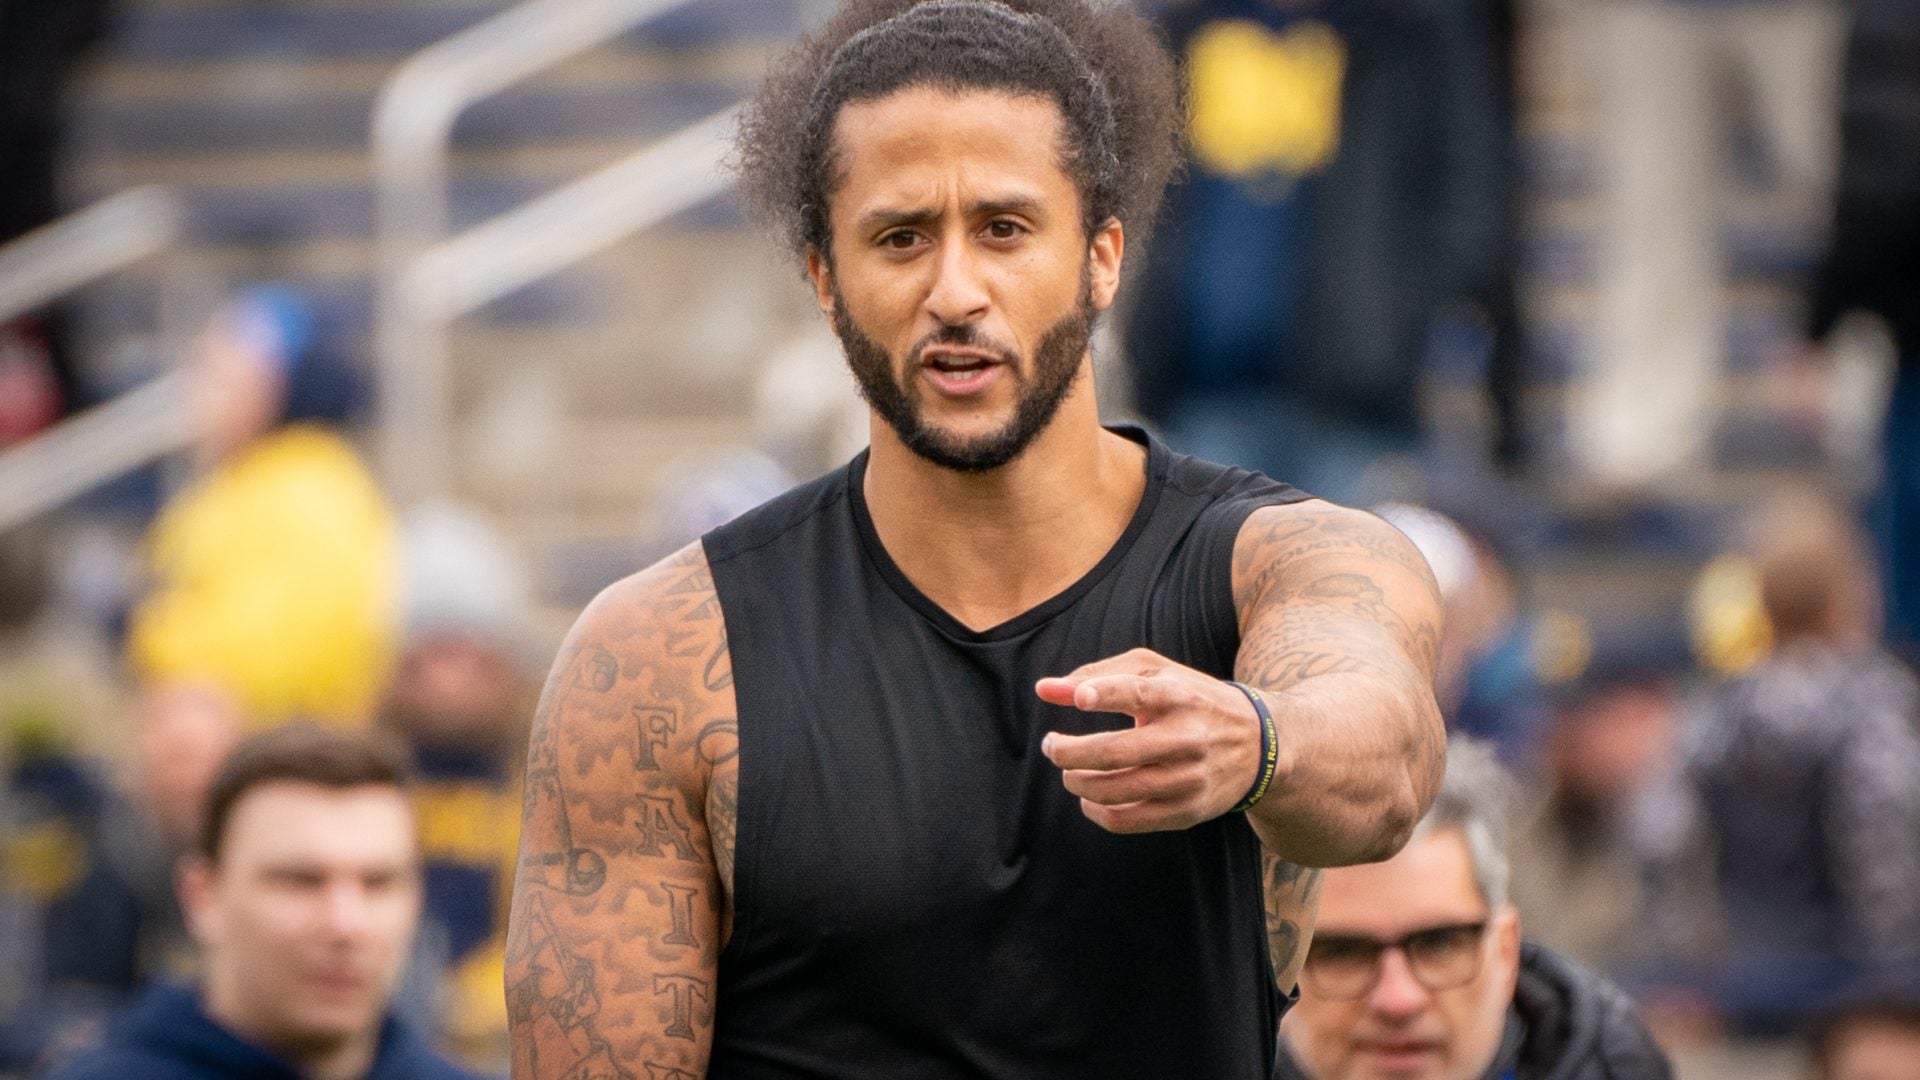 We'll Never Forget How Colin Kaepernick Protested For Black Lives. Here's What He's Been Up To